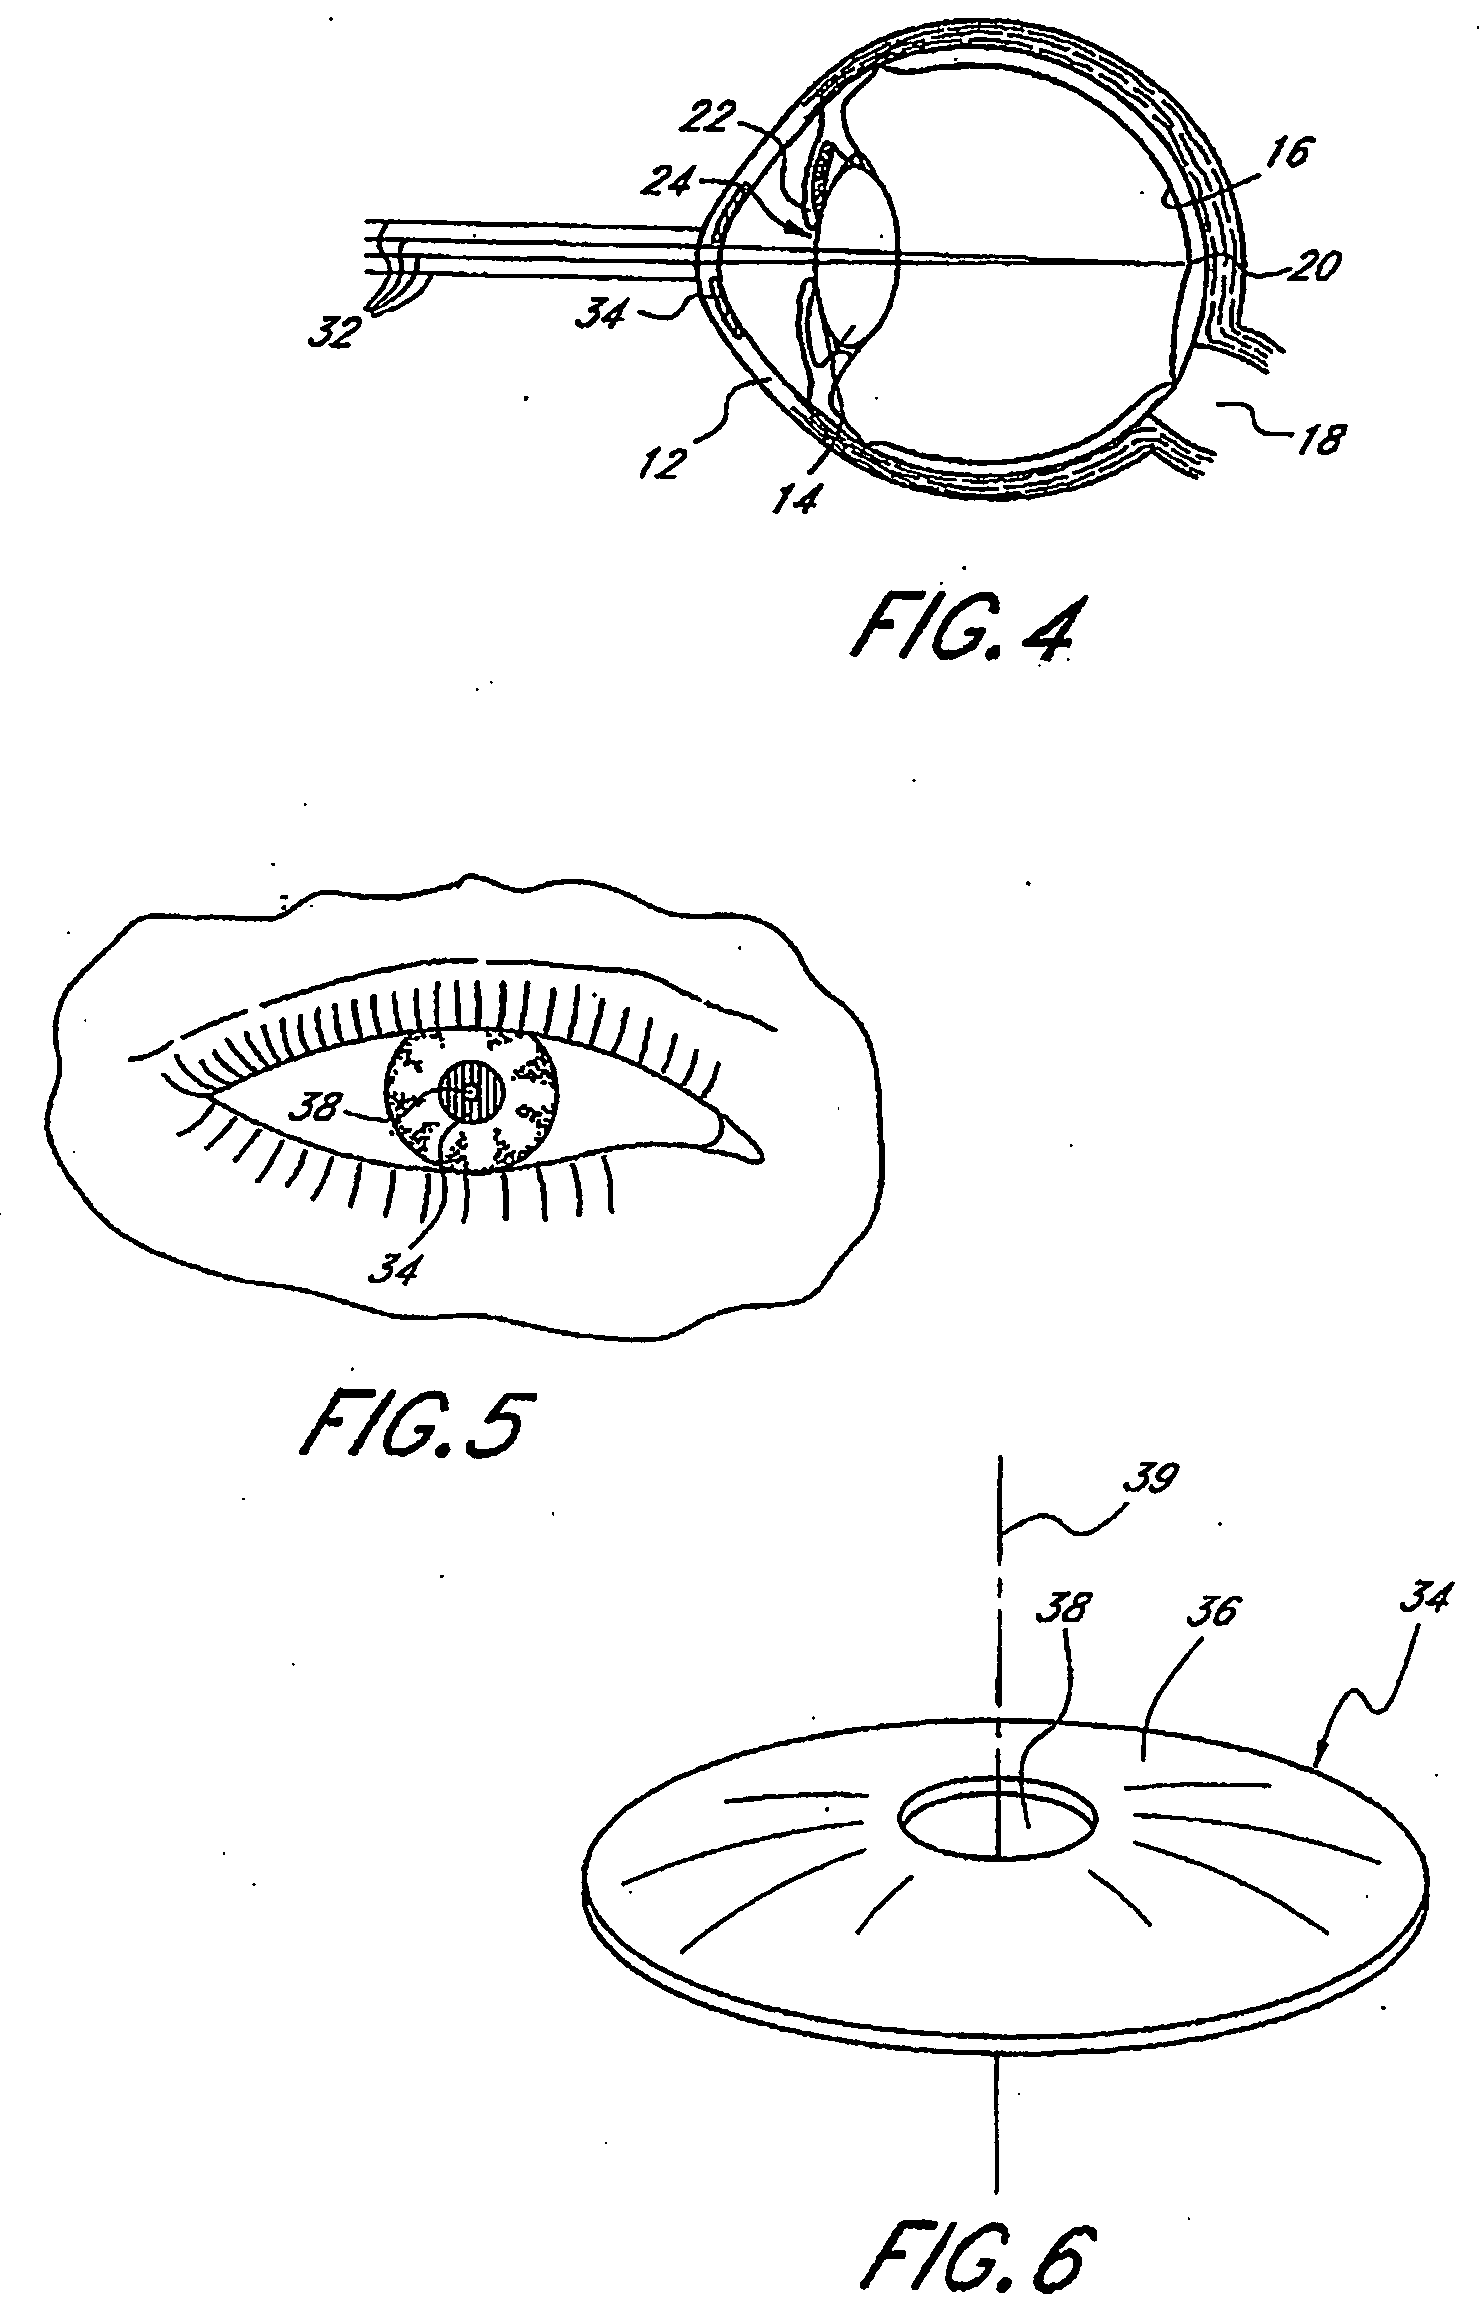 System and method for aligning an optic with an axis of an eye